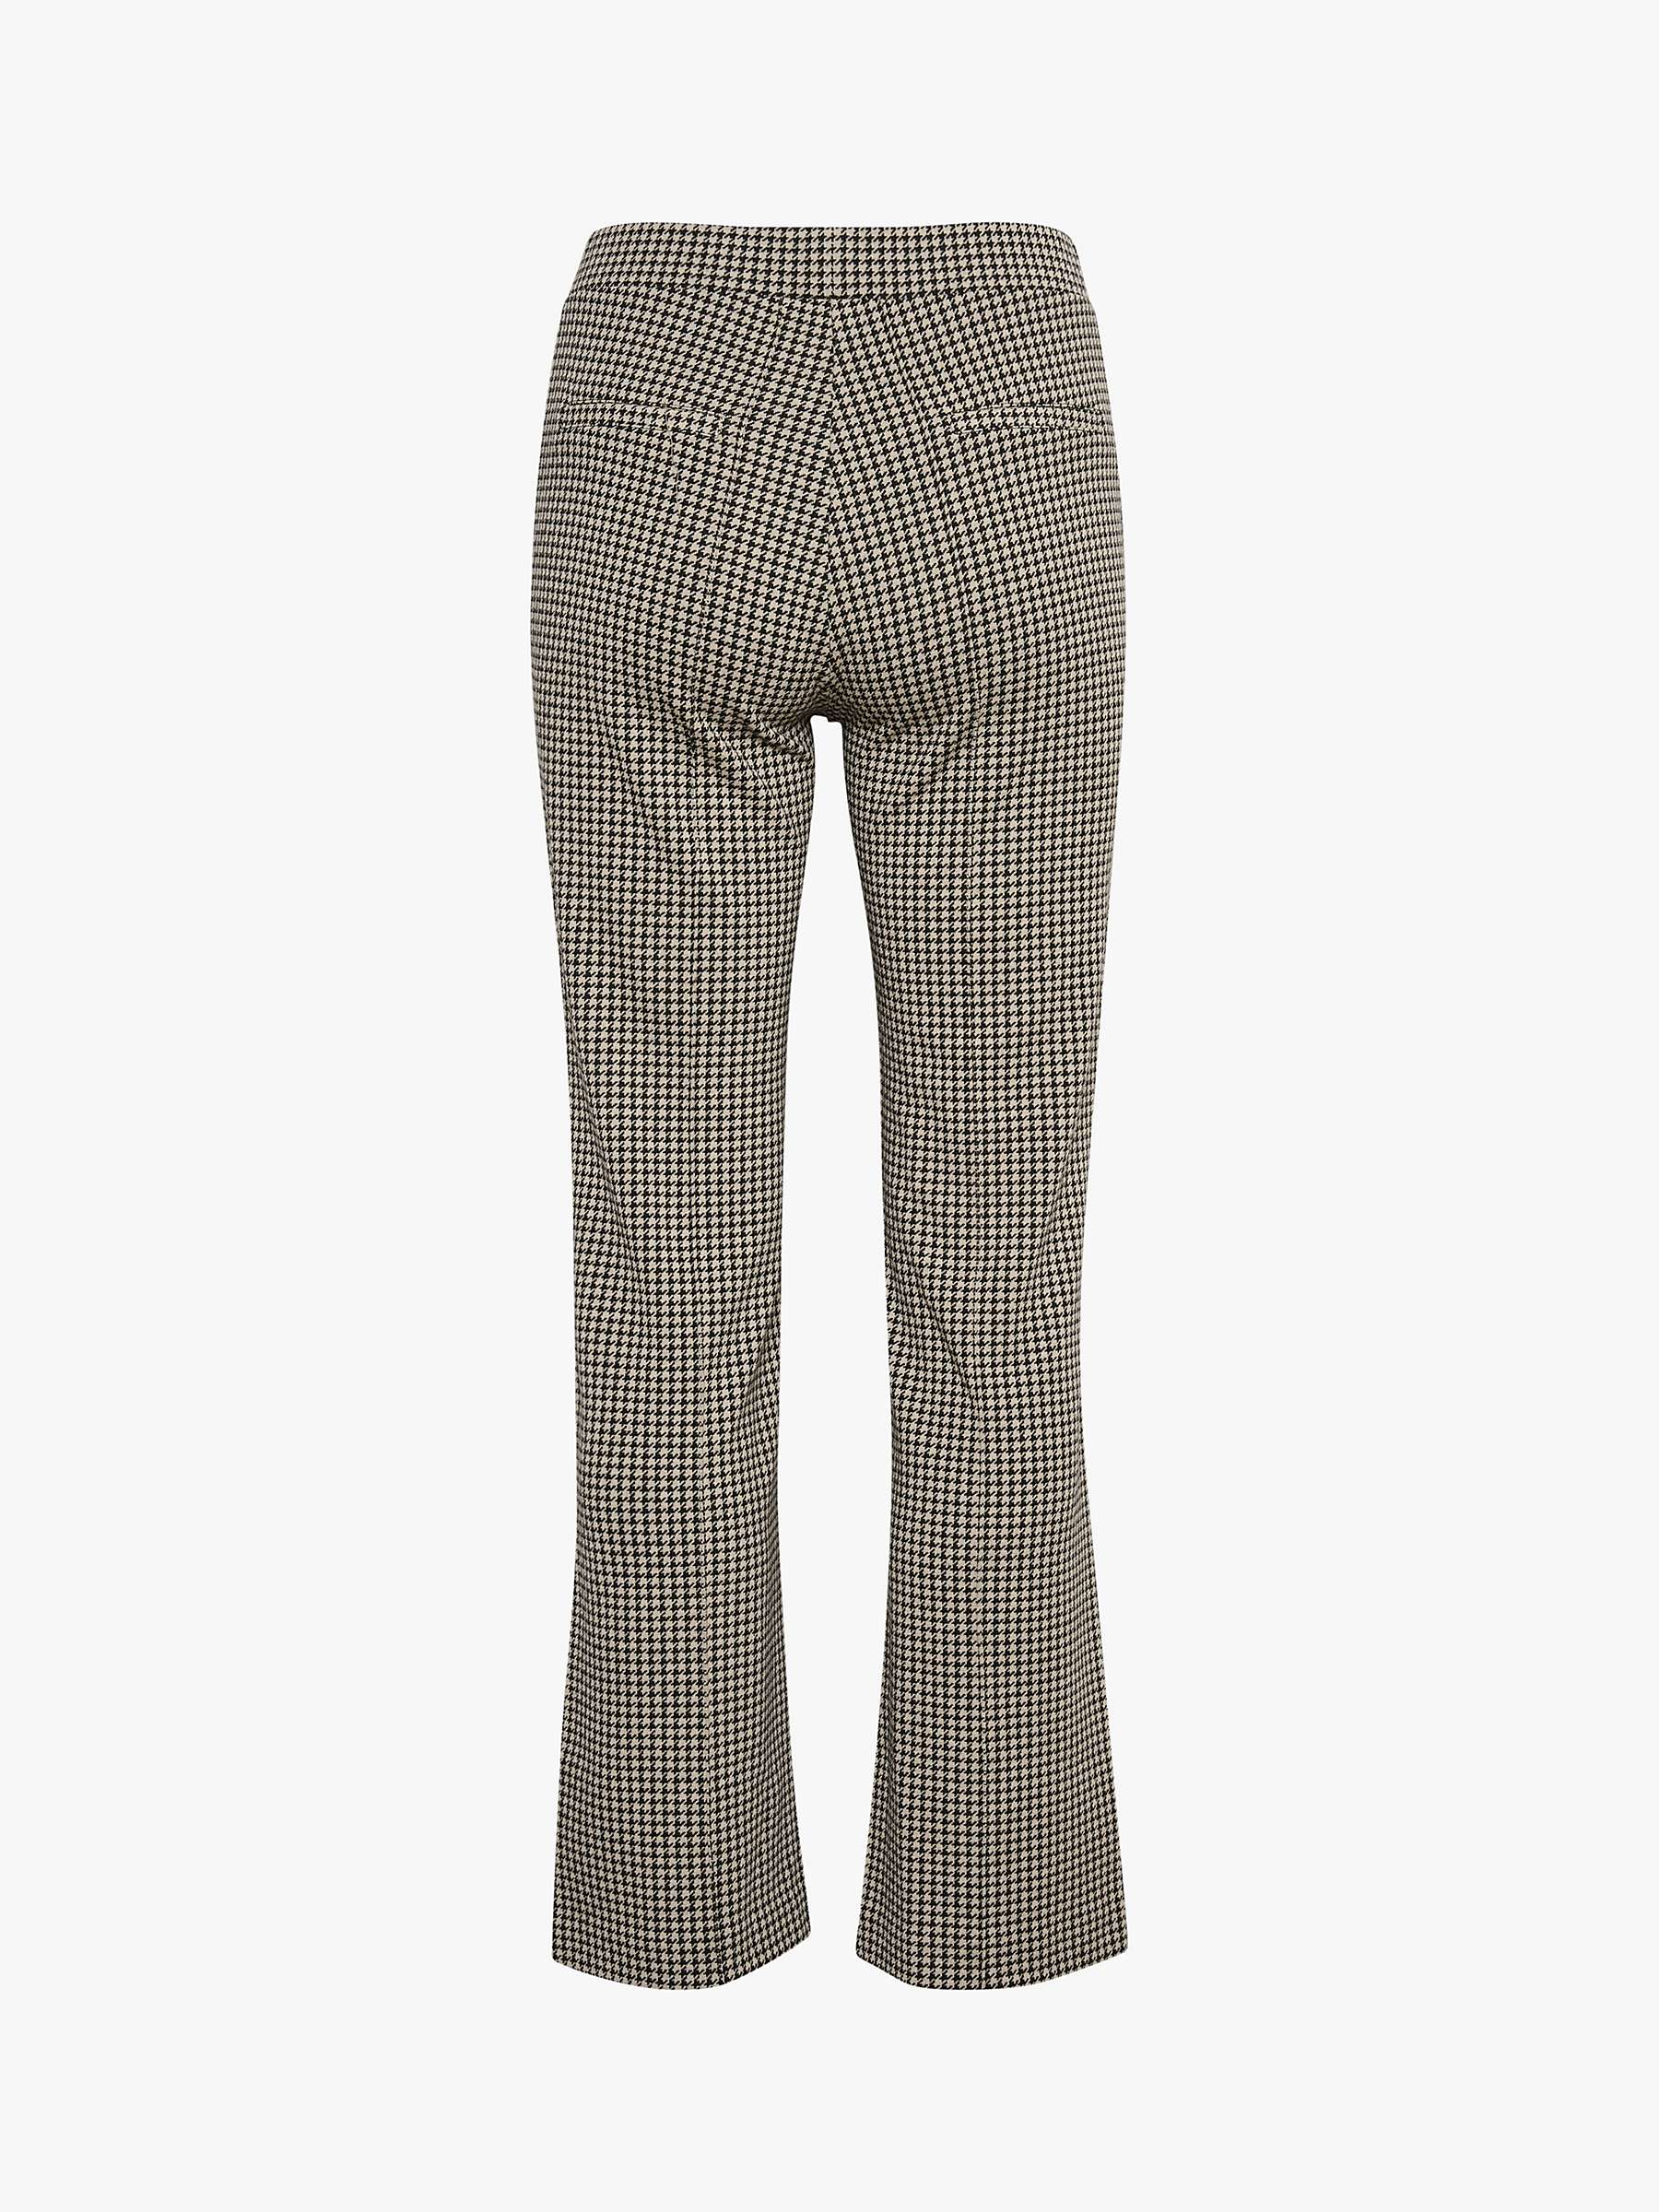 Buy Part Two Pontas Straight Leg Jersey Trousers, Black Houndstooth Online at johnlewis.com